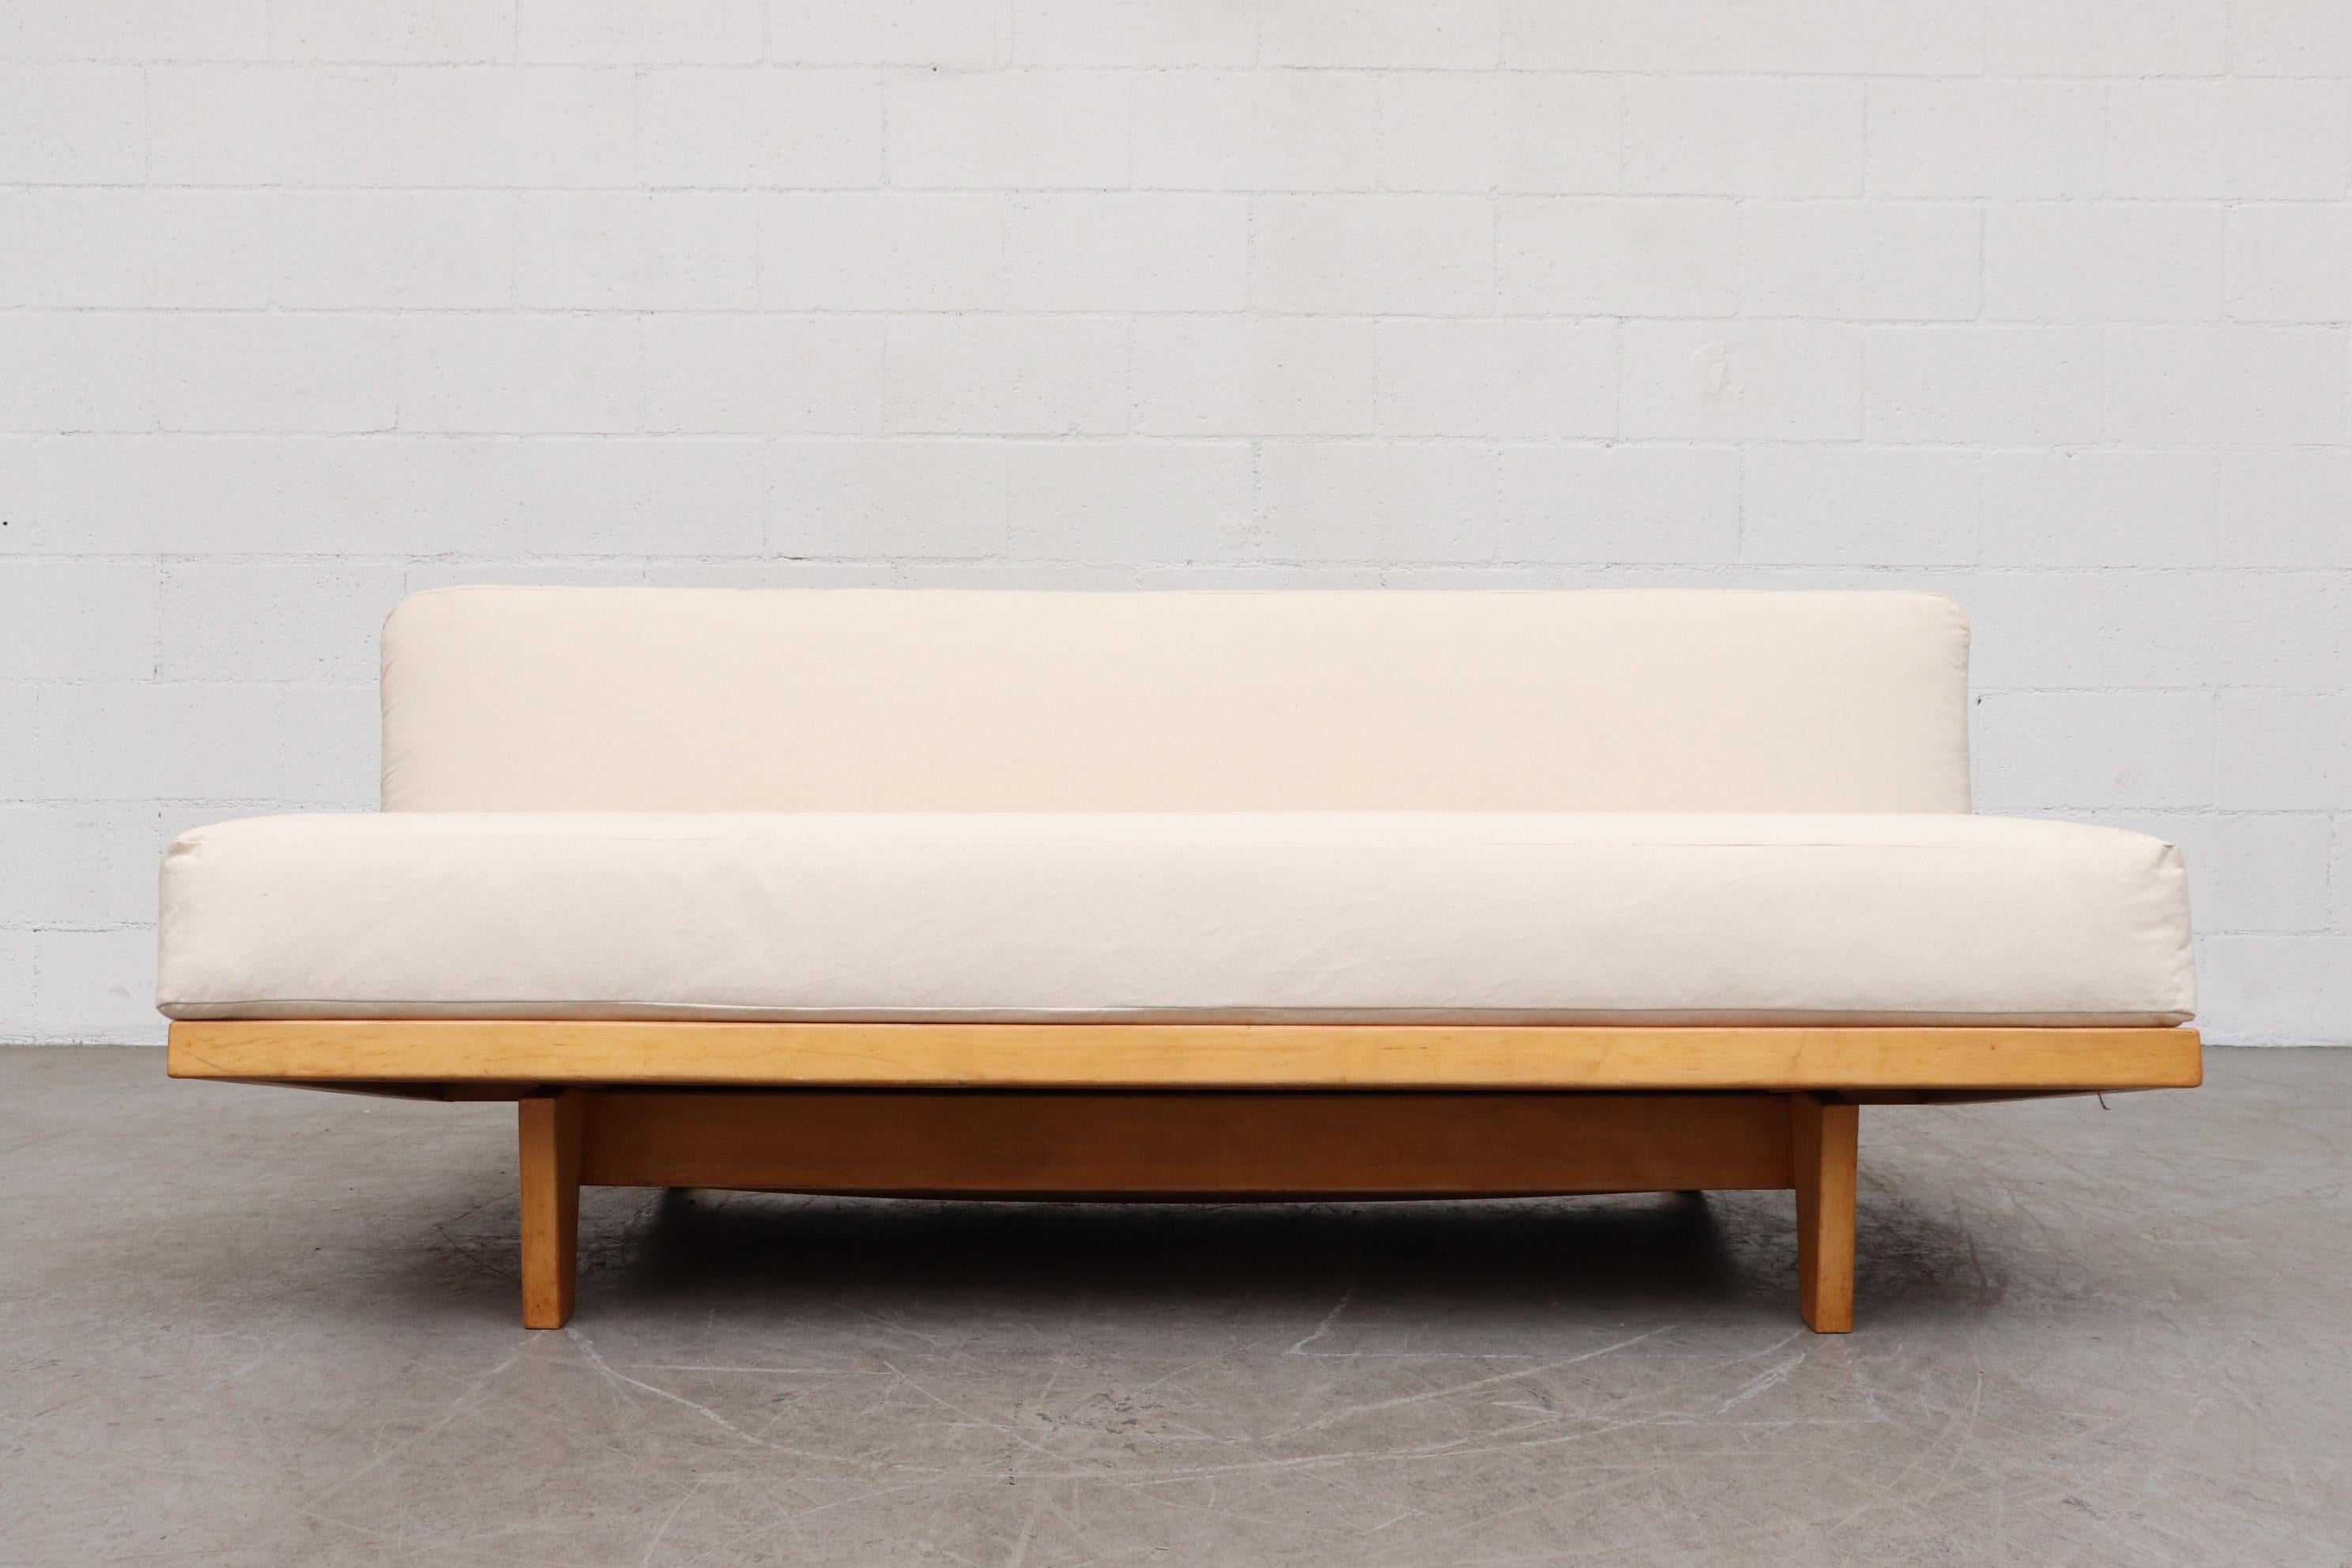 Stunning original sit and sleep nodel MB09 couch with hidden blanket storage. Birchwood with new two-tone webbing similar to the original. Designed by Dirk van Sliedregt in 1951 for UMS Pastoe Holland, in Production until 1954. Newly upholstered in